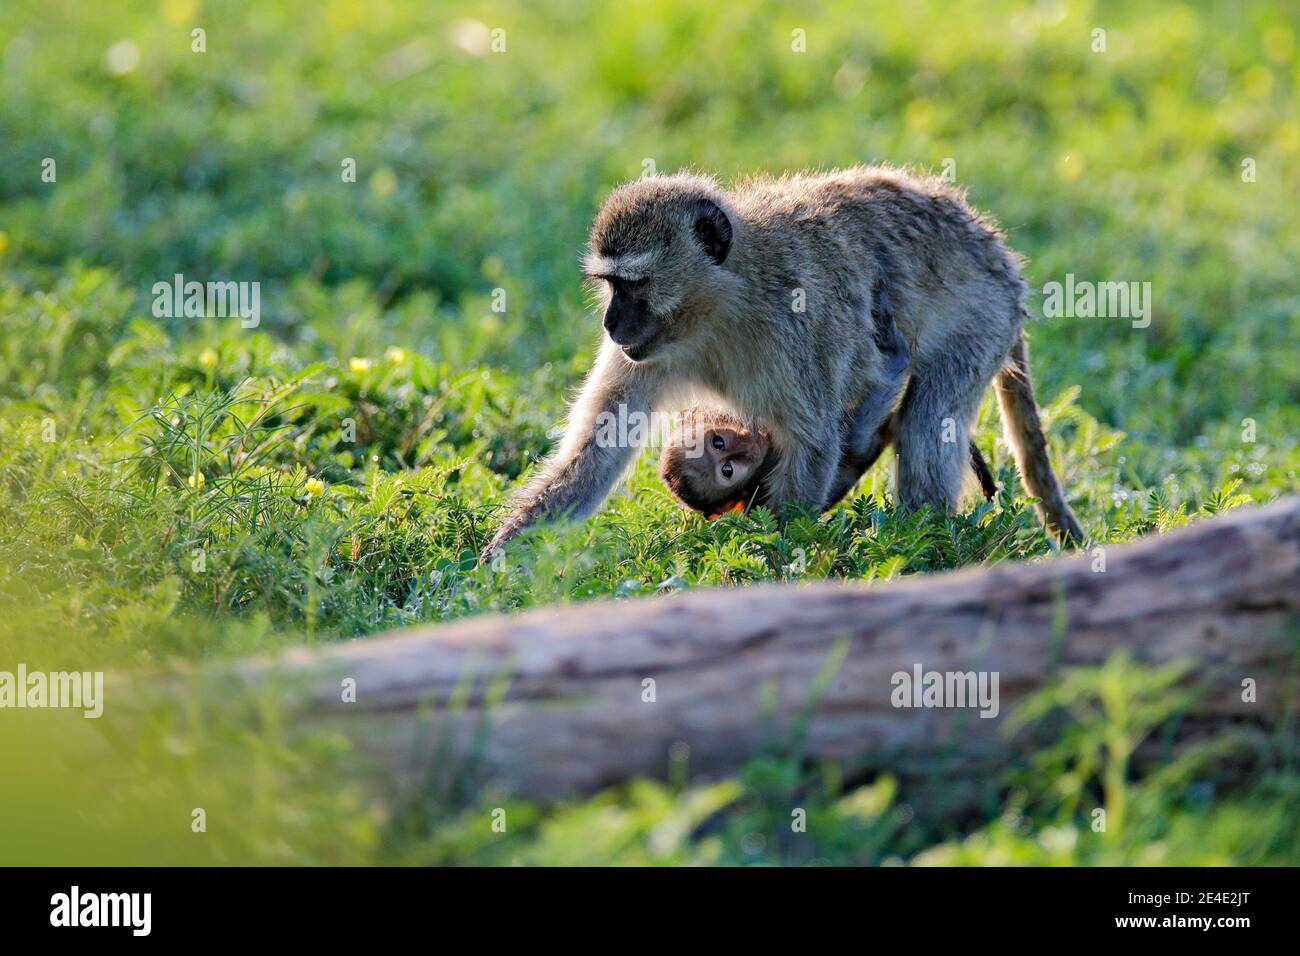 Monkey - mother with young babe. Wildlife scene from nature. Monkey in green. Vervet monkey, Chlorocebus pygerythrus, portrait of grey and black face Stock Photo